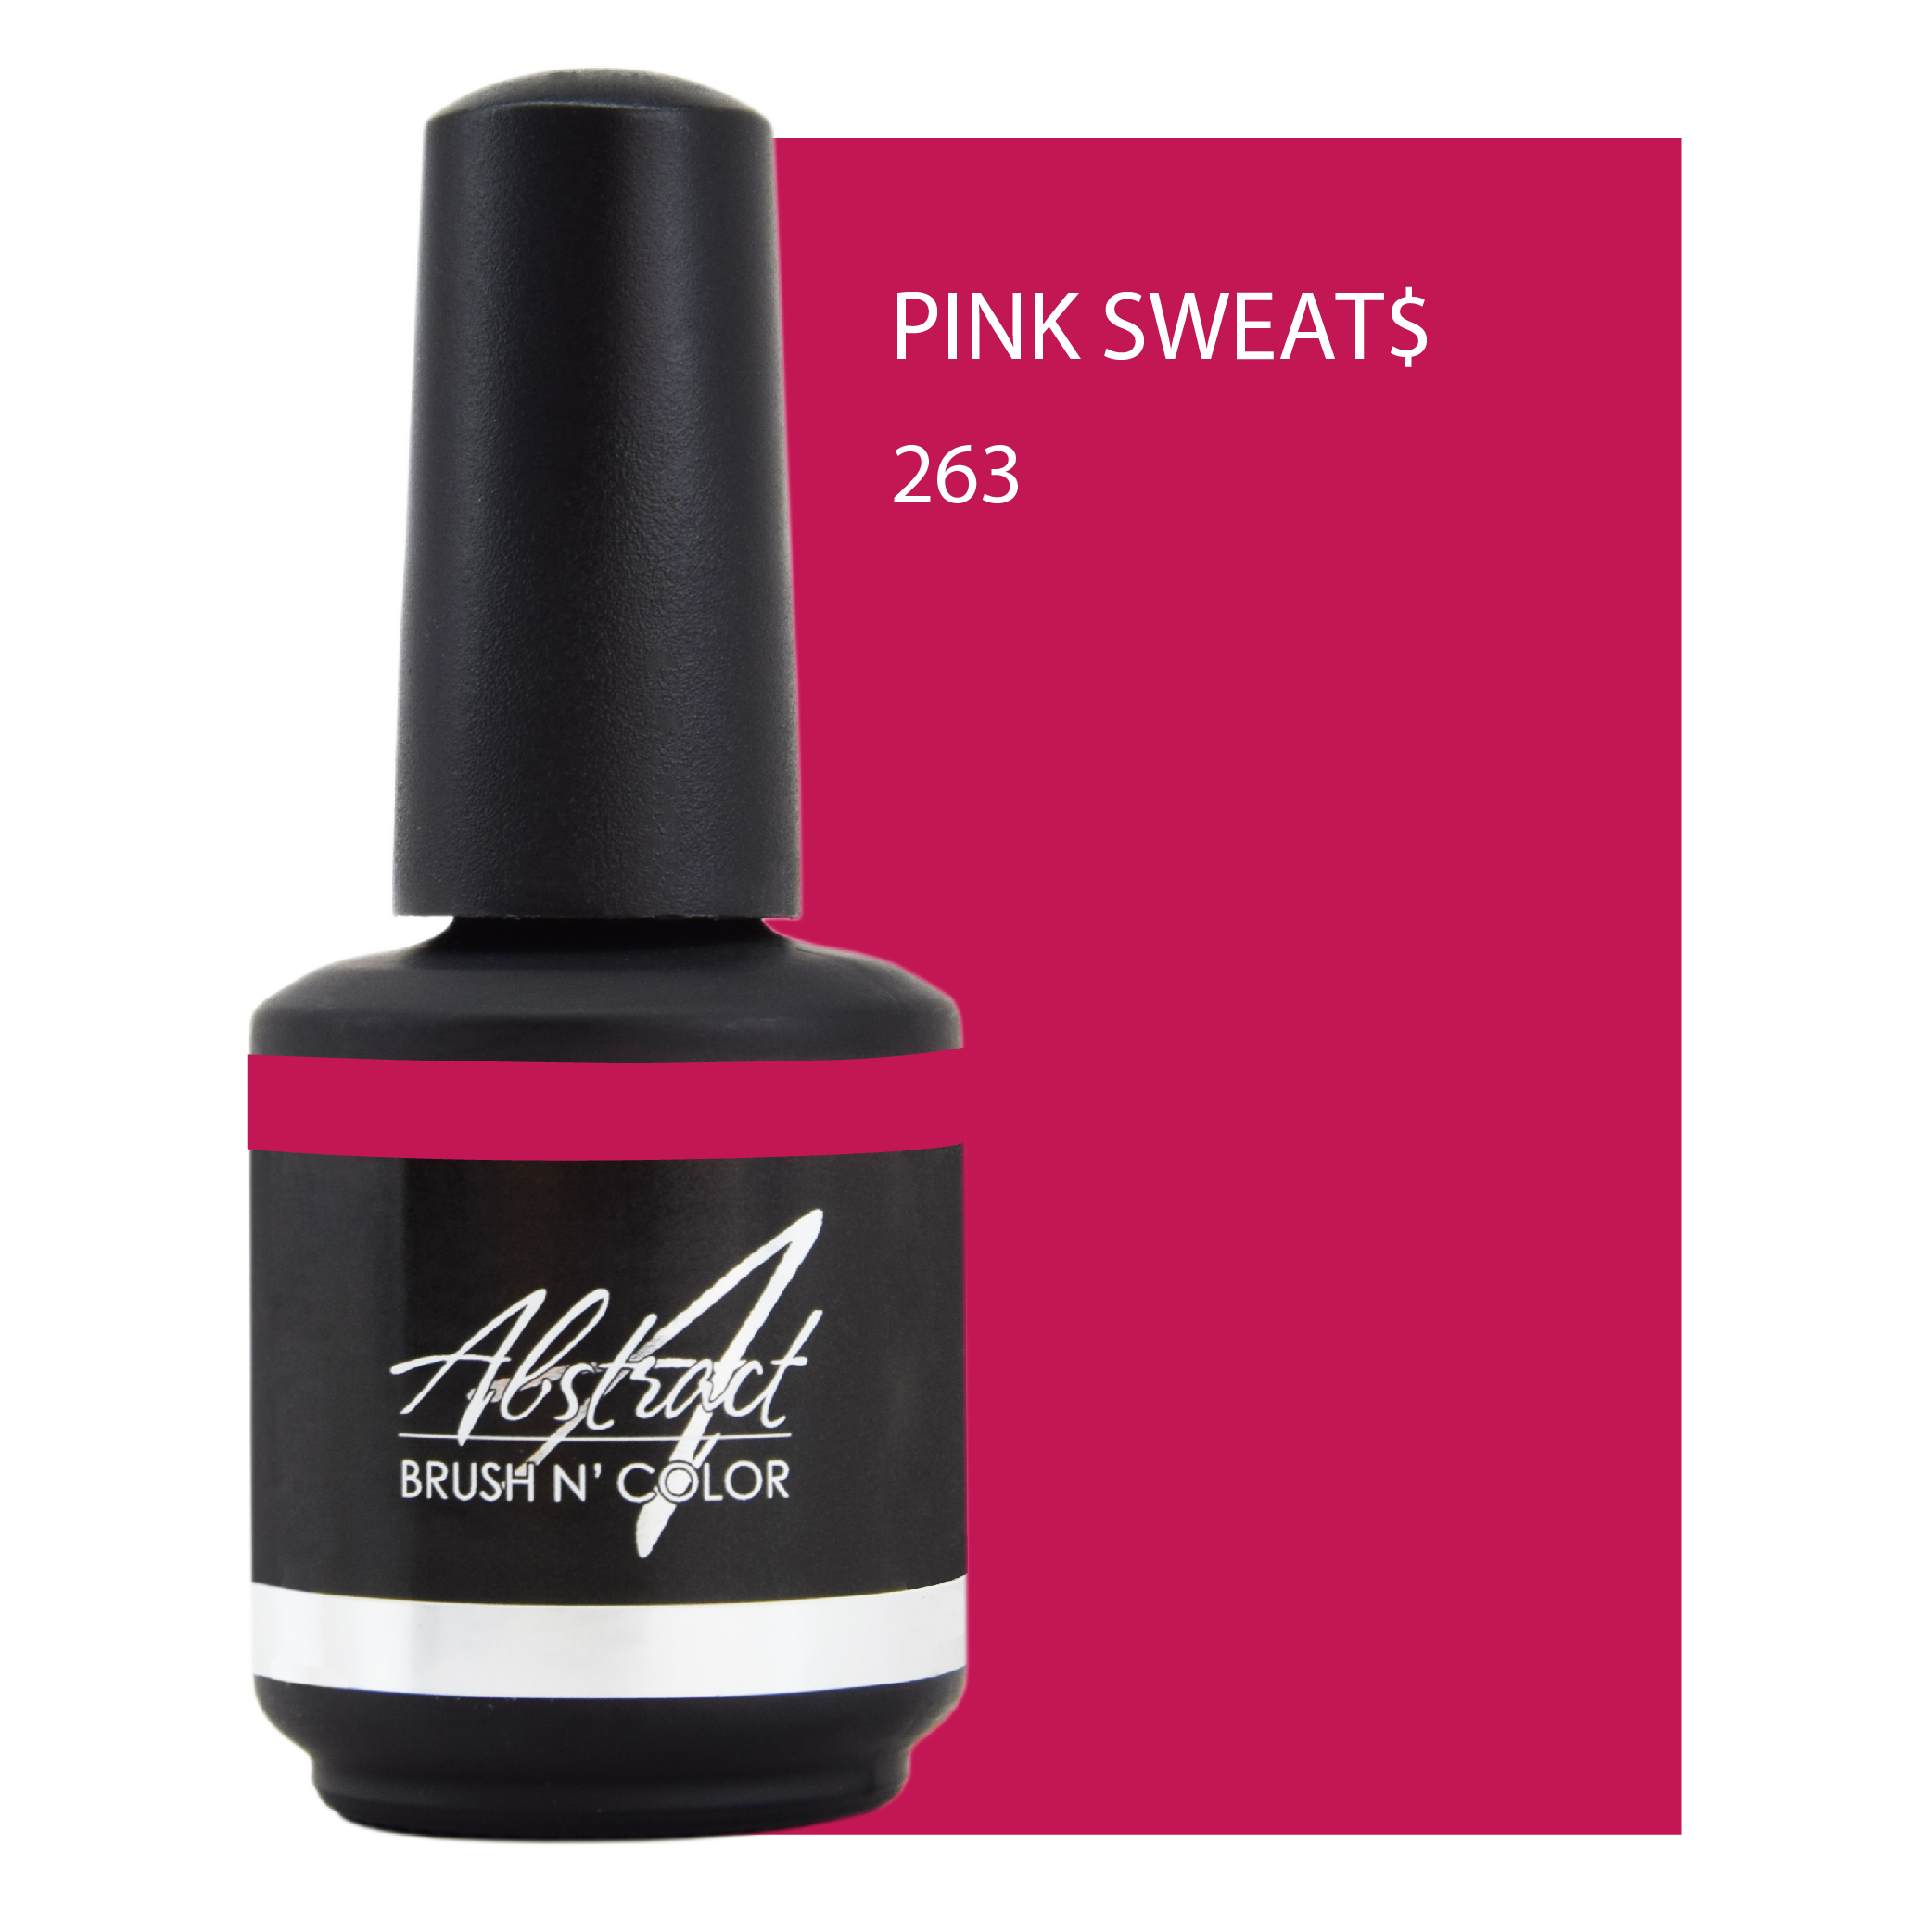 263* Pink Sweat$  15 ml (HotHouse Party), Abstract | 048278